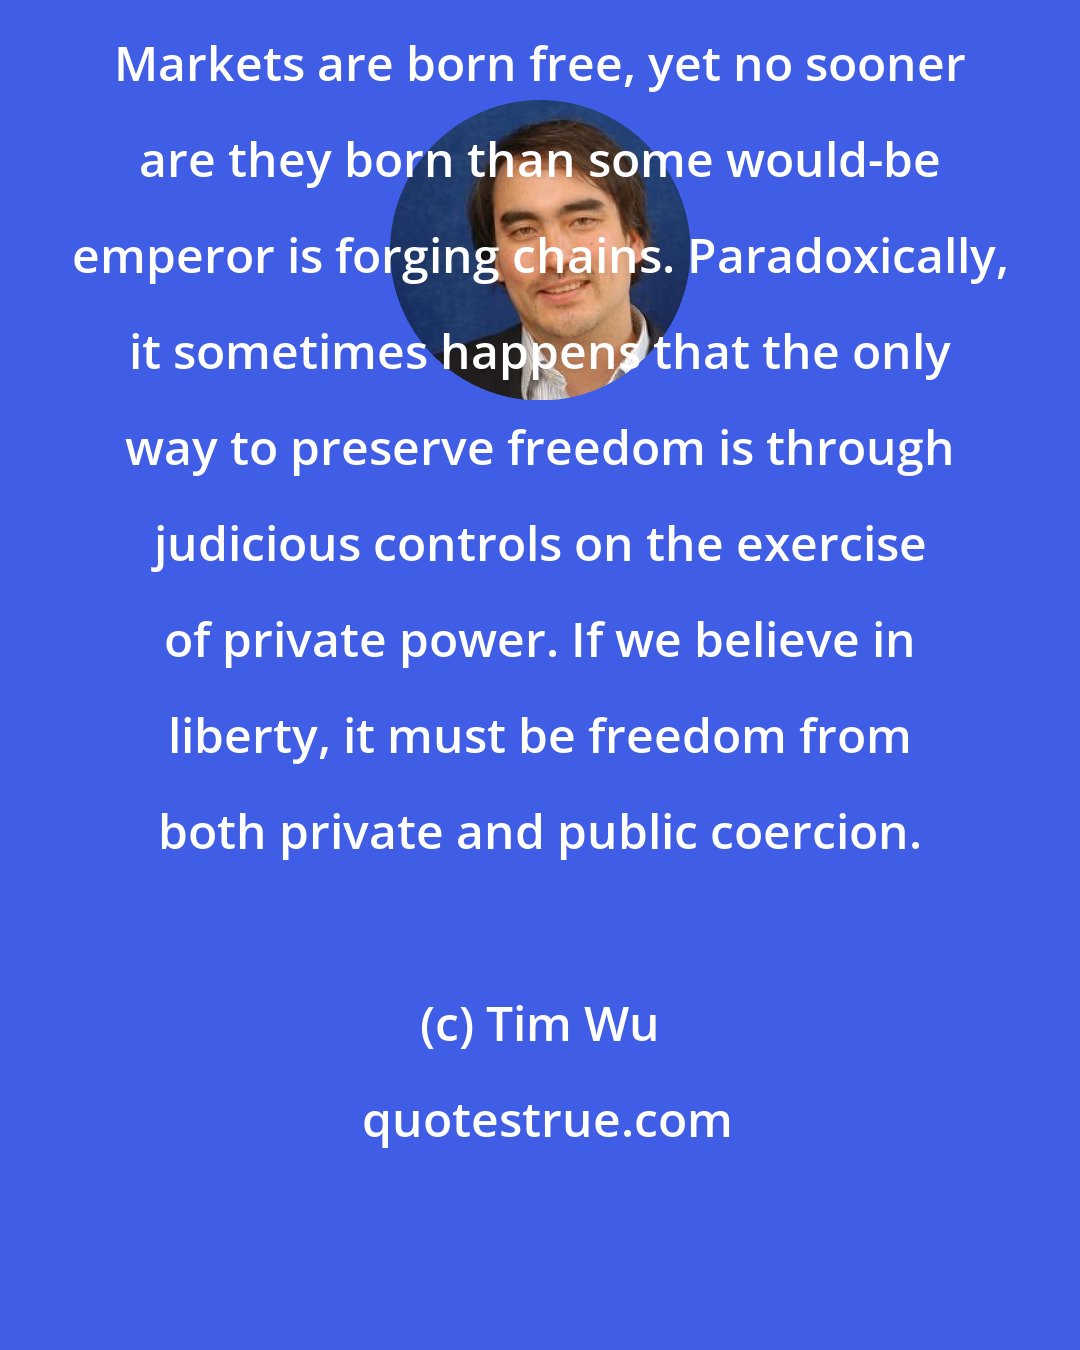 Tim Wu: Markets are born free, yet no sooner are they born than some would-be emperor is forging chains. Paradoxically, it sometimes happens that the only way to preserve freedom is through judicious controls on the exercise of private power. If we believe in liberty, it must be freedom from both private and public coercion.